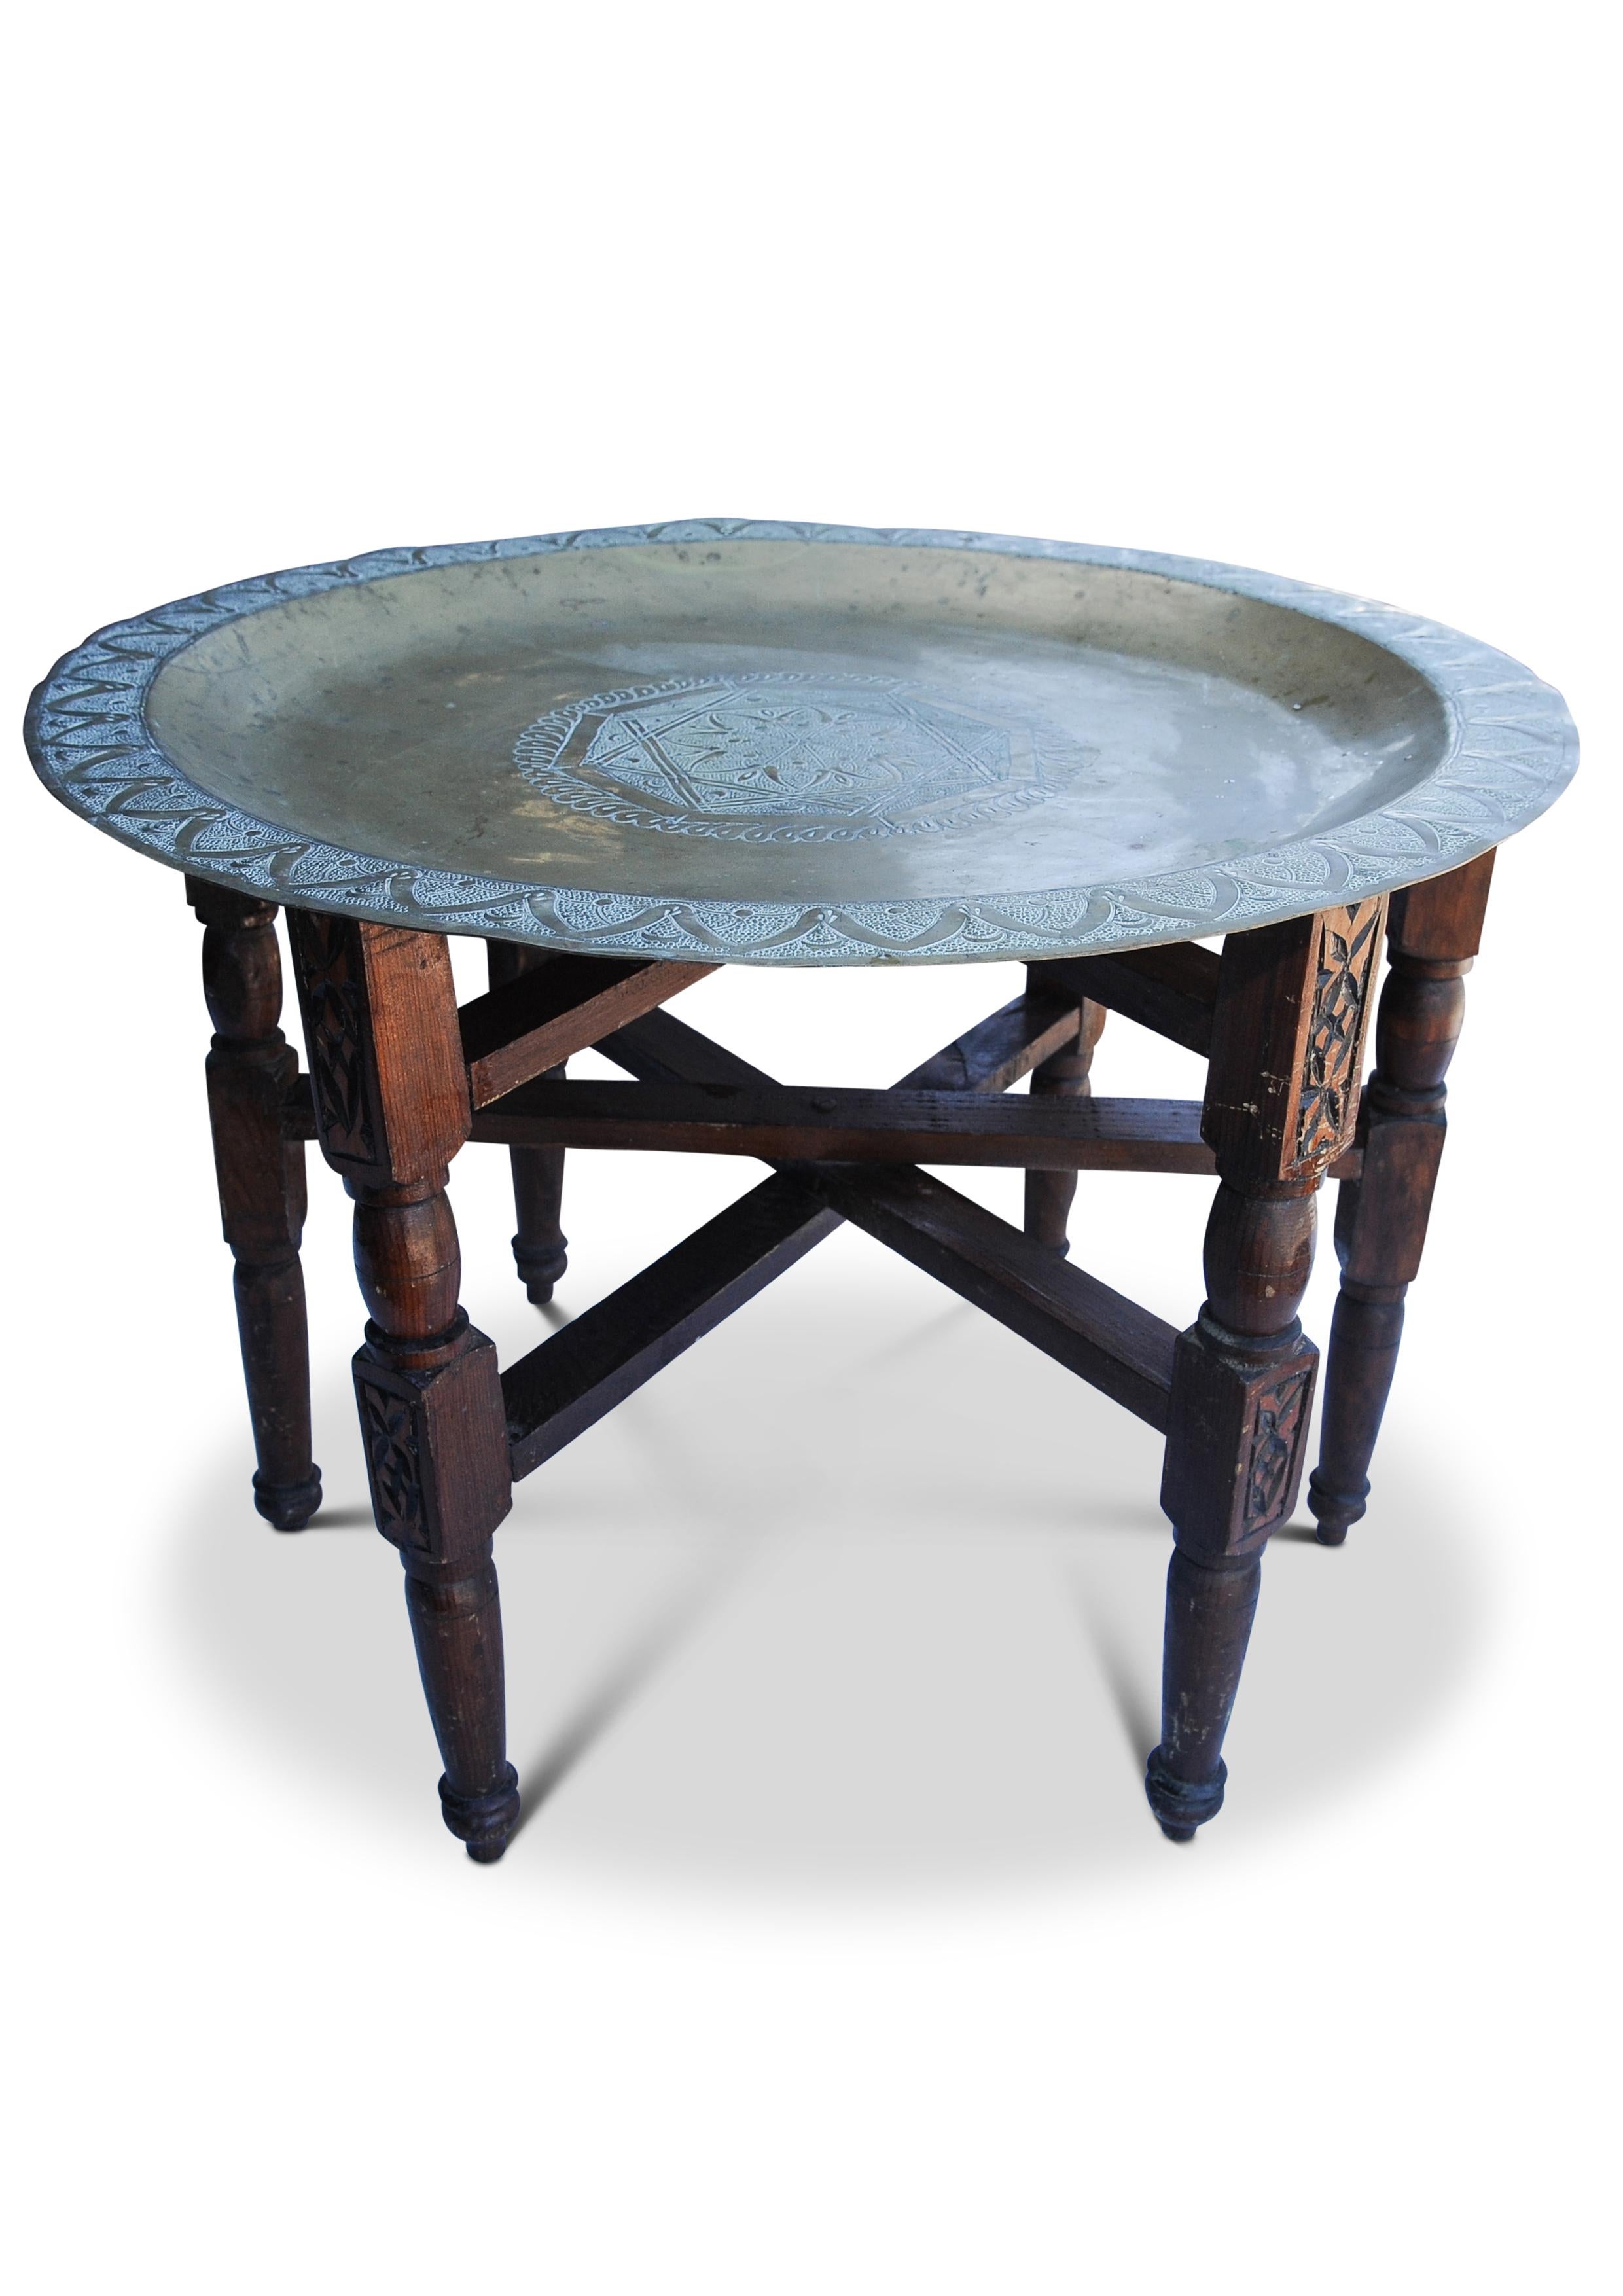 Engraved 19th Century Brass And Hardwood Tea Table Decorated With Decorative Top For Sale